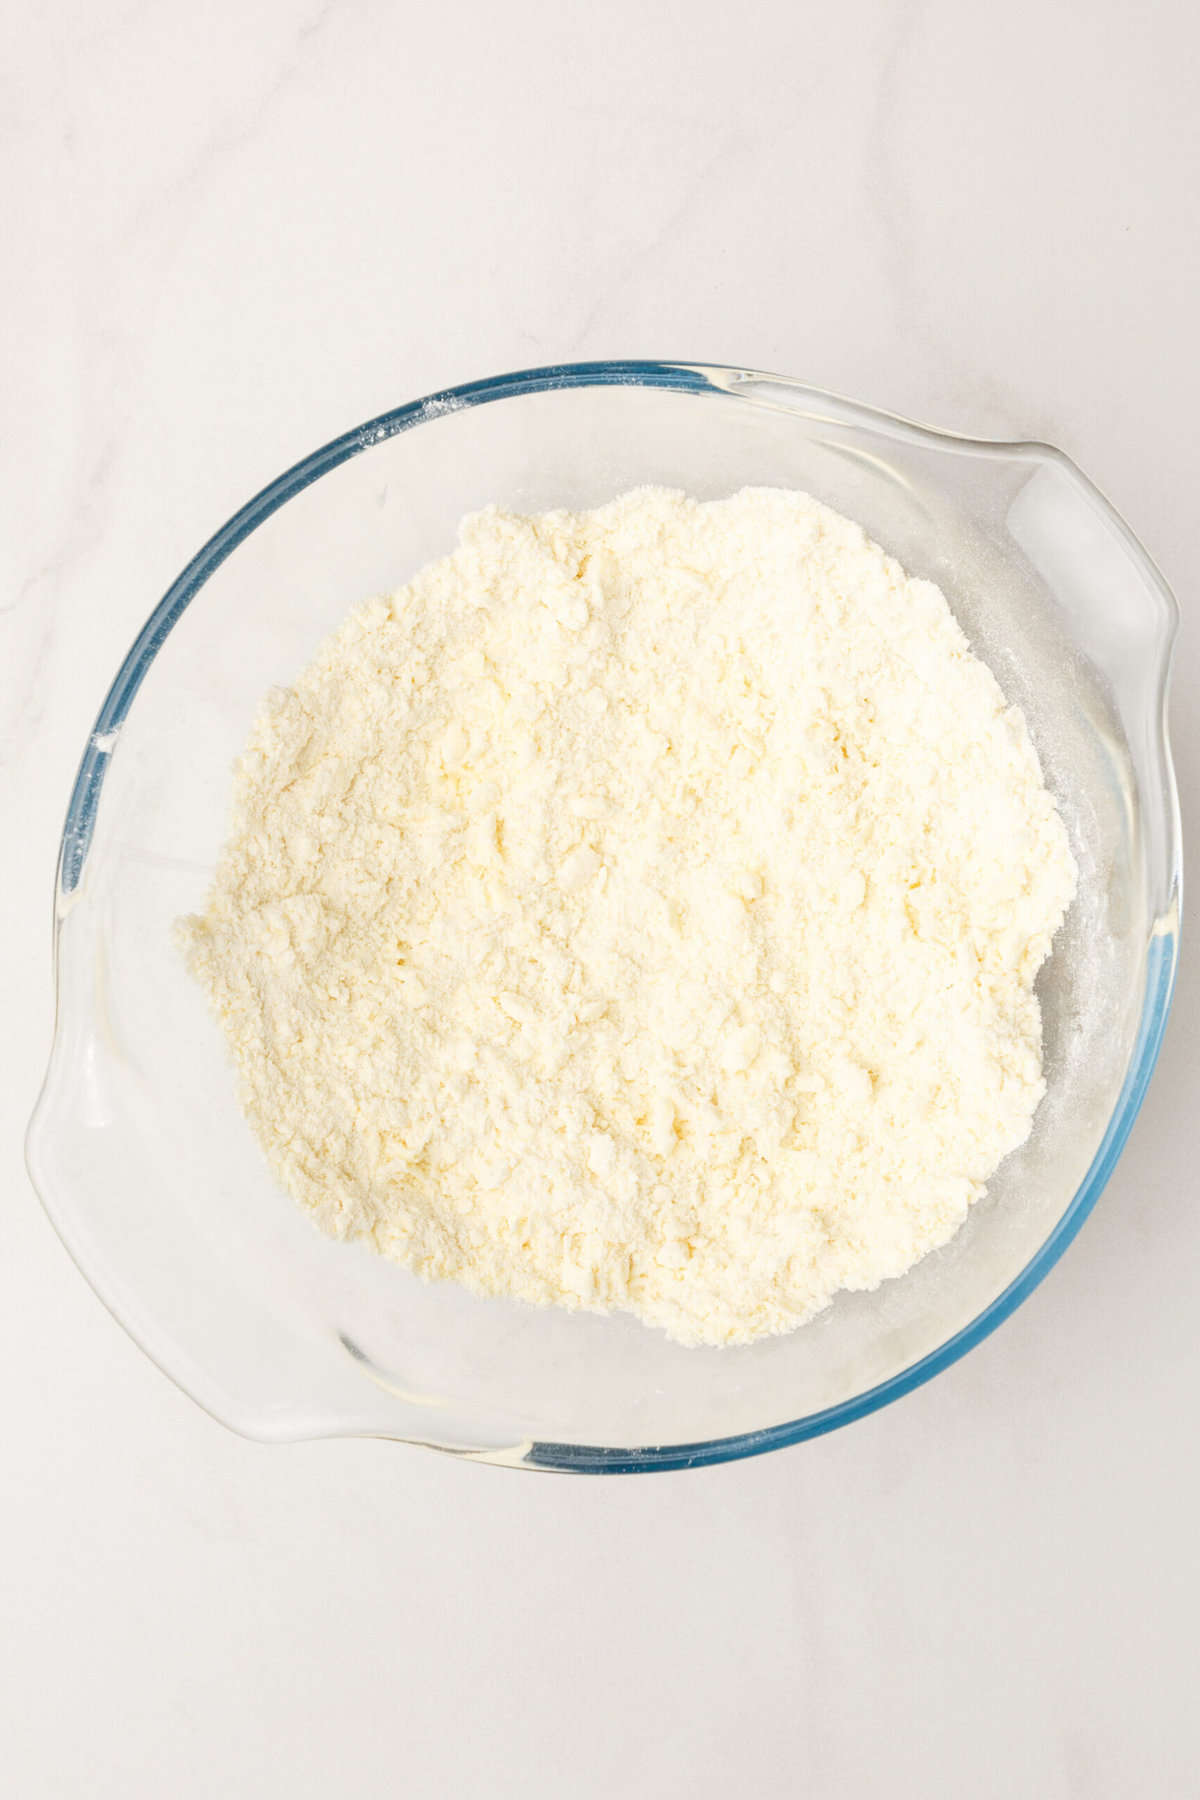 Top down image of a large glass mixing bowl with flour.